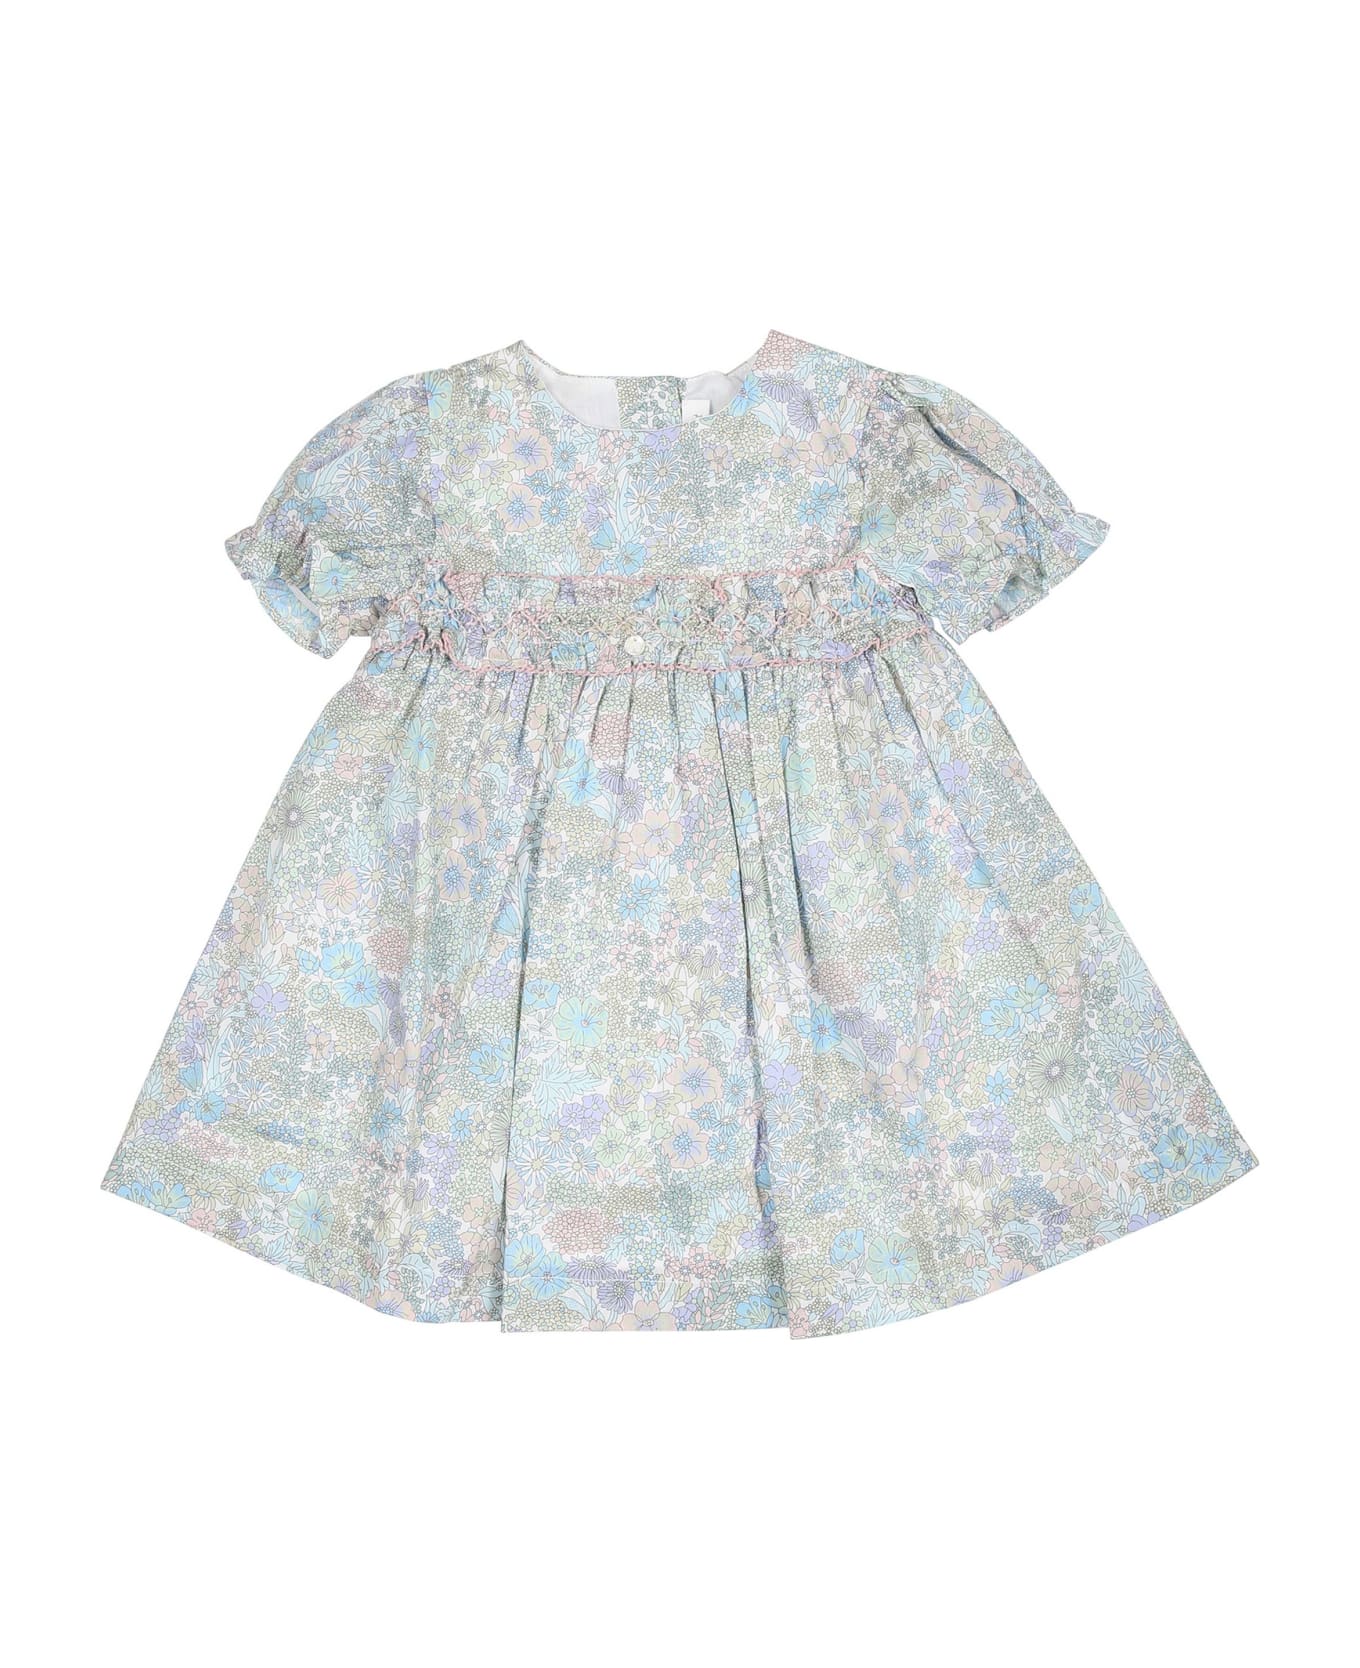 Tartine et Chocolat Sky Blue Casual Dress For Baby Girl With Liberty Fabric - Light Blue